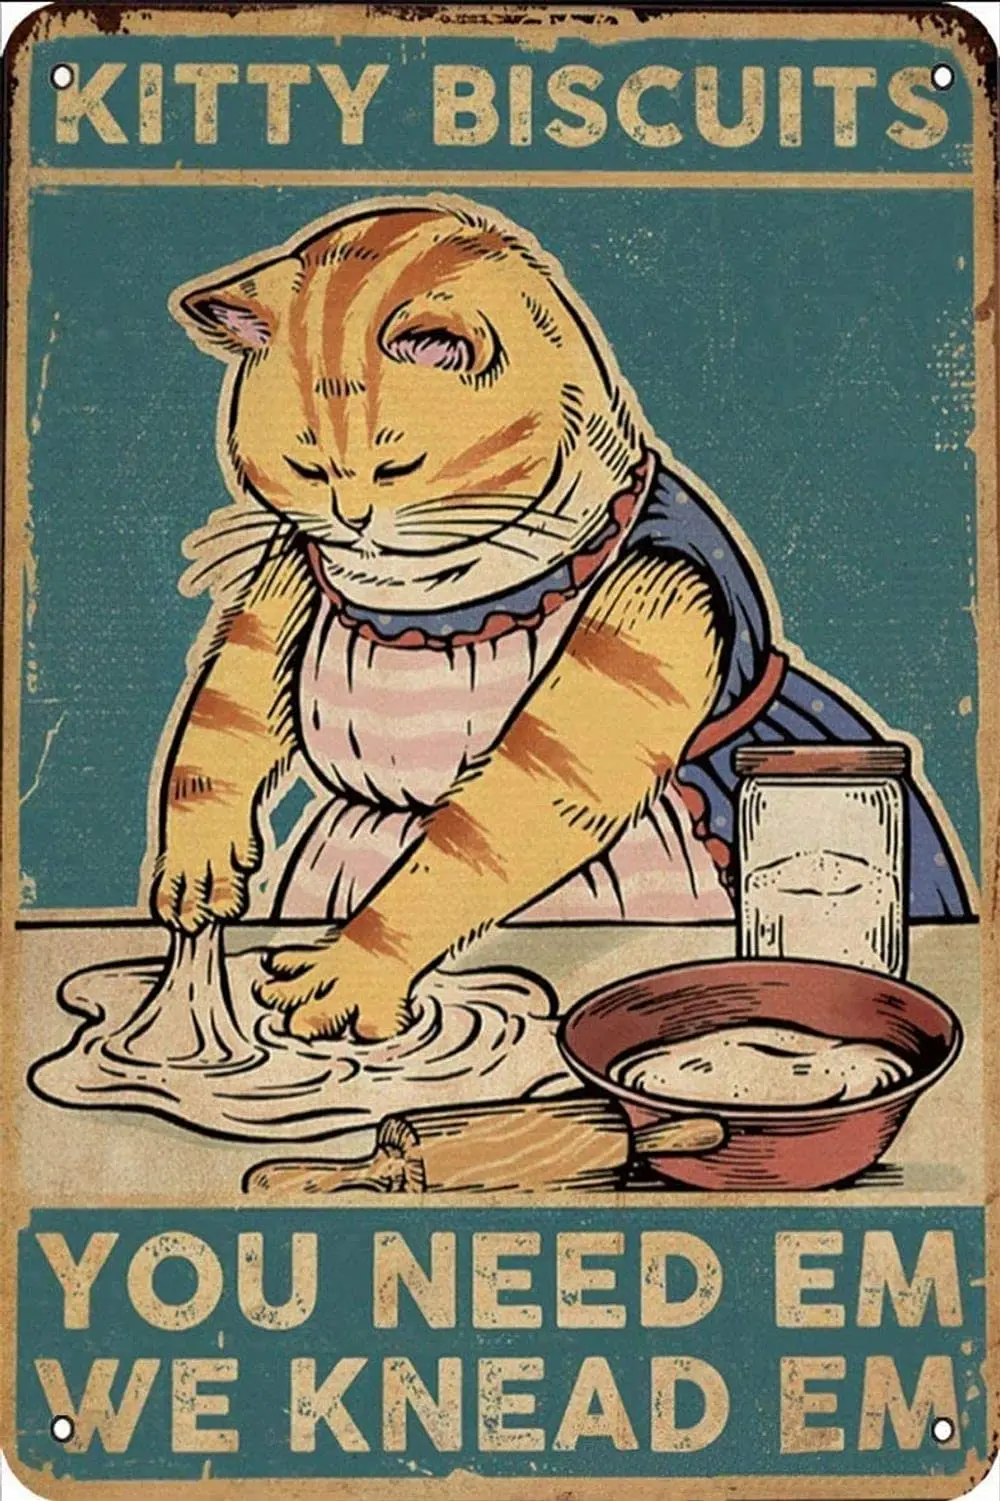 

GadgetsTalk Kitty Biscuits Metal Tin Sign We Knead Em You Need Em Vintage Aluminum Sign for Home Kitchen Coffee Farmhouse Wall D